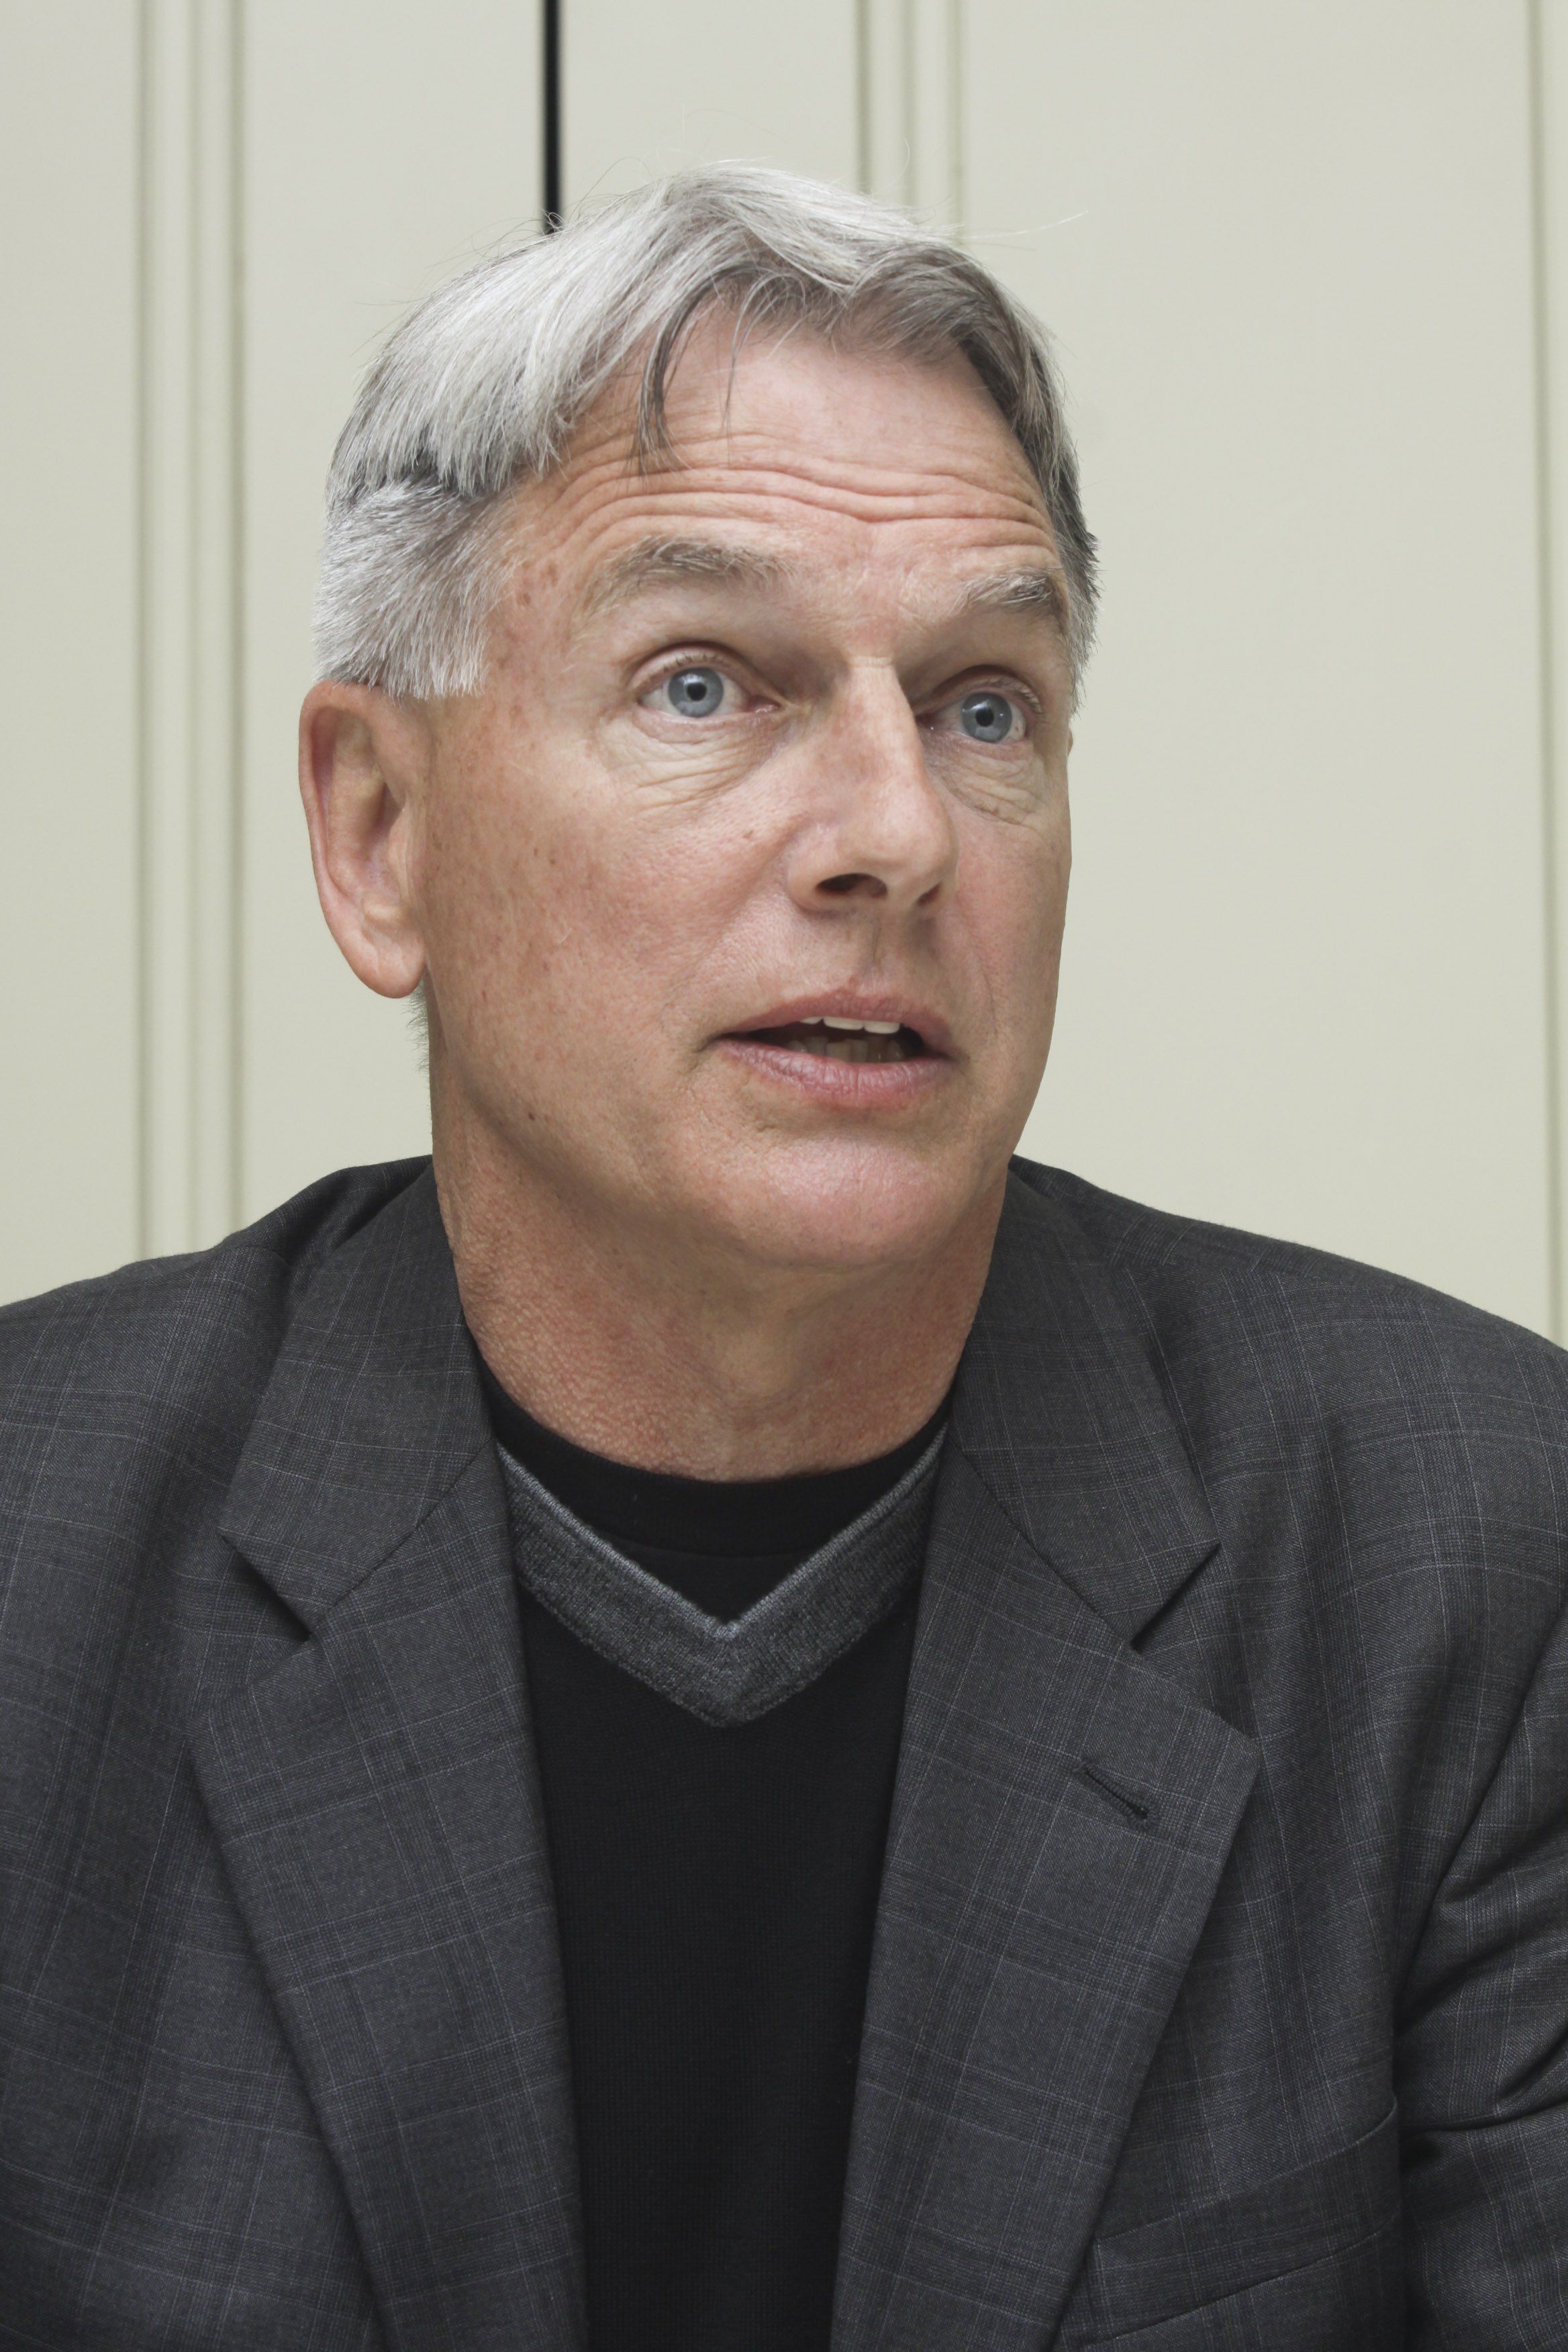 Mark Harmon in Beverly Hills, California on March 10, 2010. | Source: Getty Images